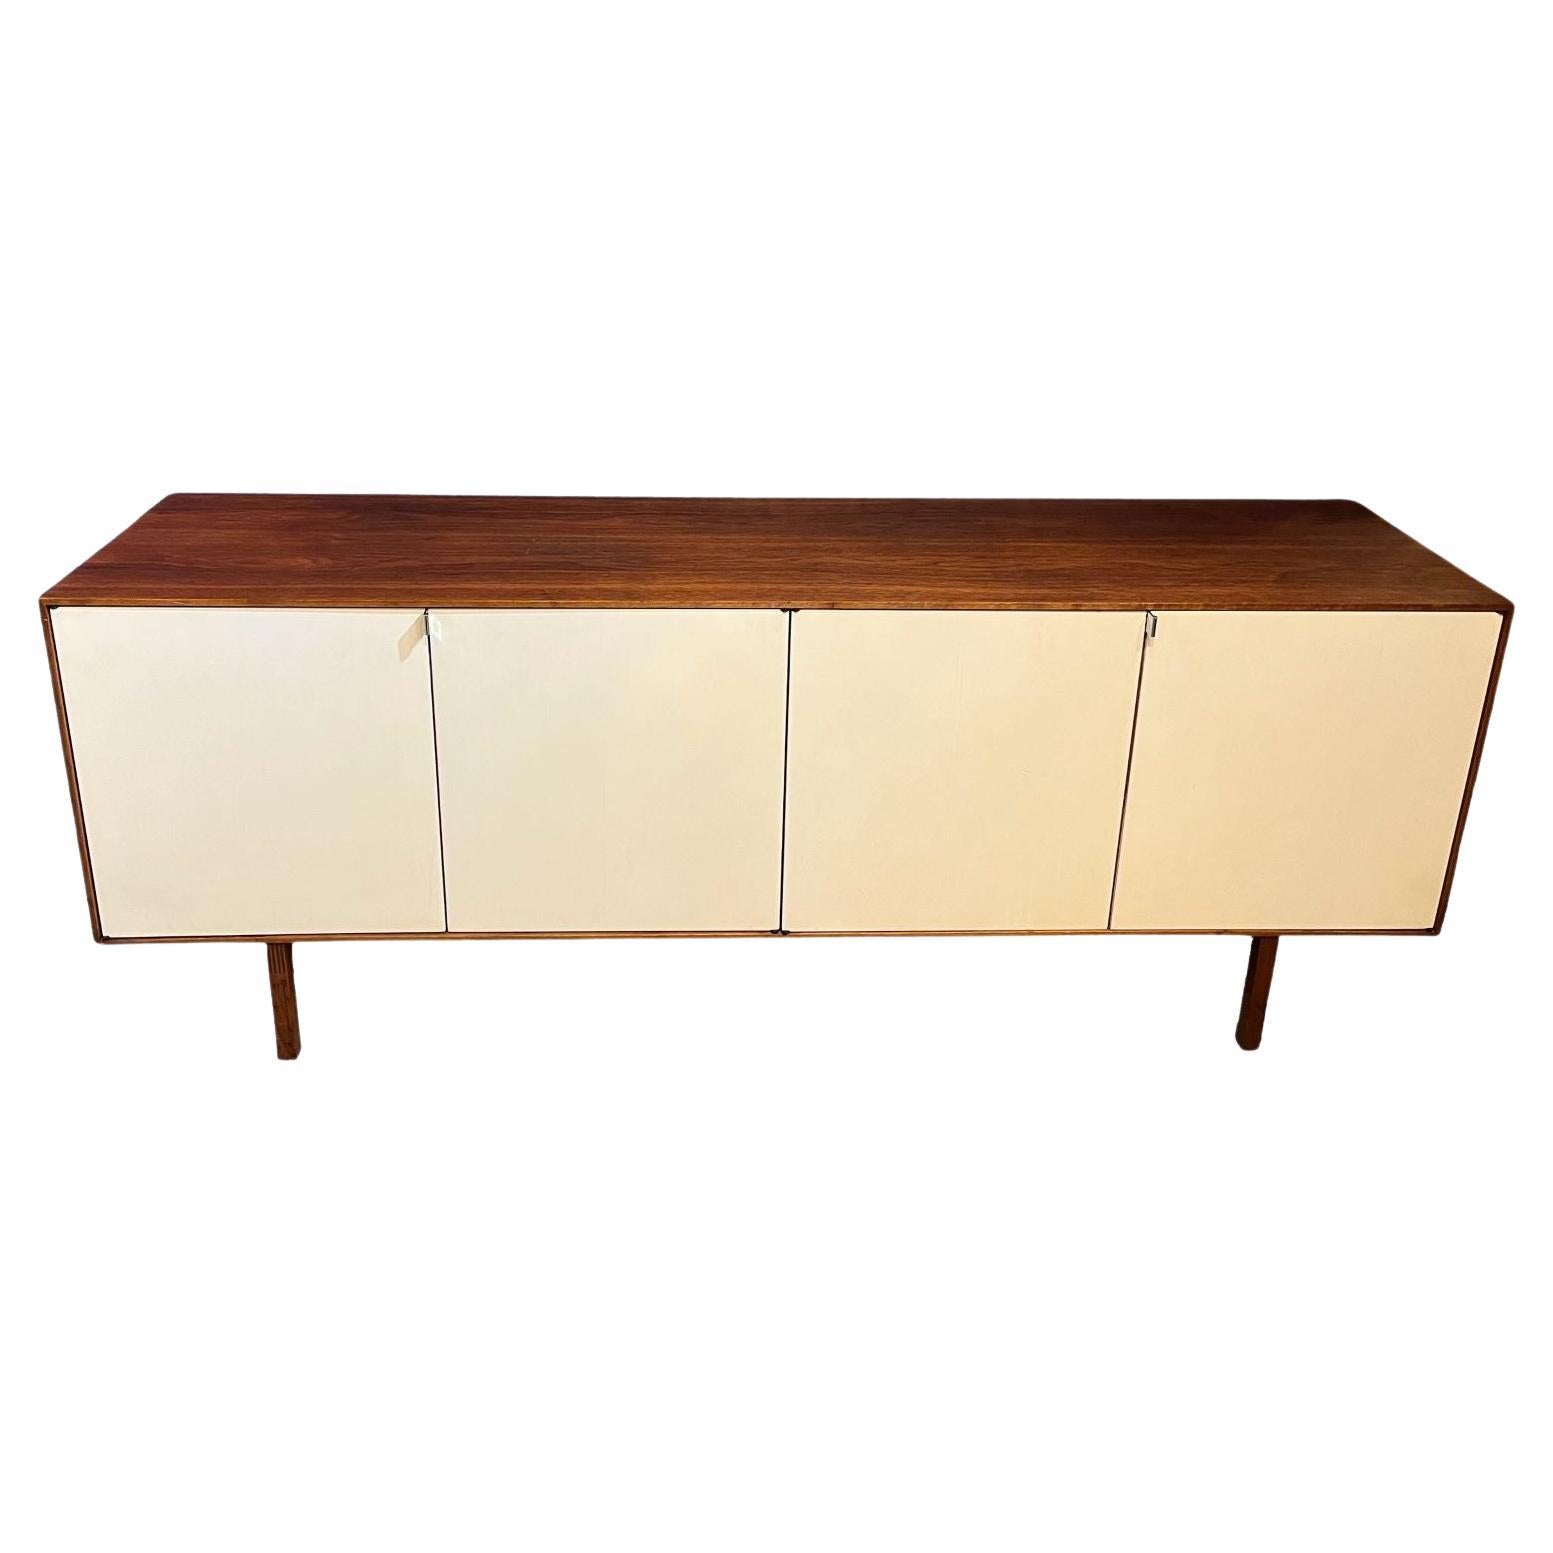 Early Florence Knoll For Knoll Associates Walnut And Cream Credenza C.1950 For Sale